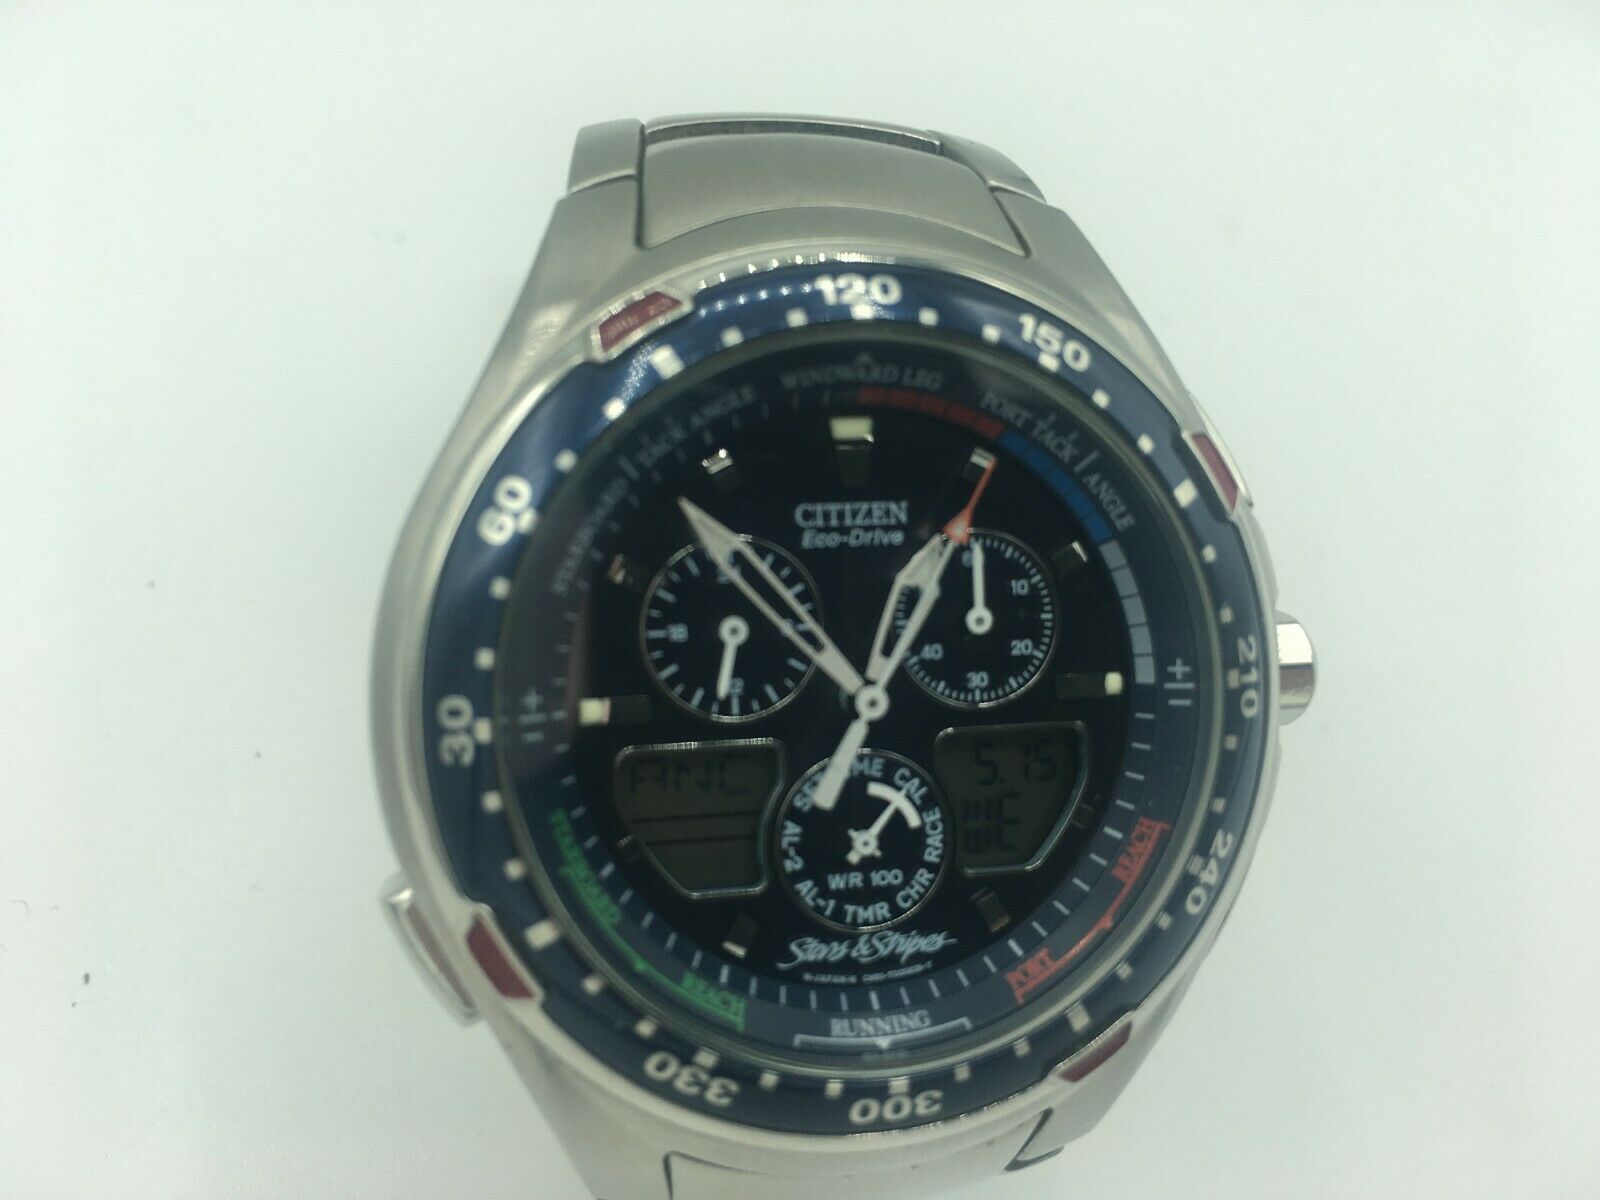 CITIZEN ECO-DRIVE STARS STRIPES YACHT WATCH 10 BAR STAINLESS